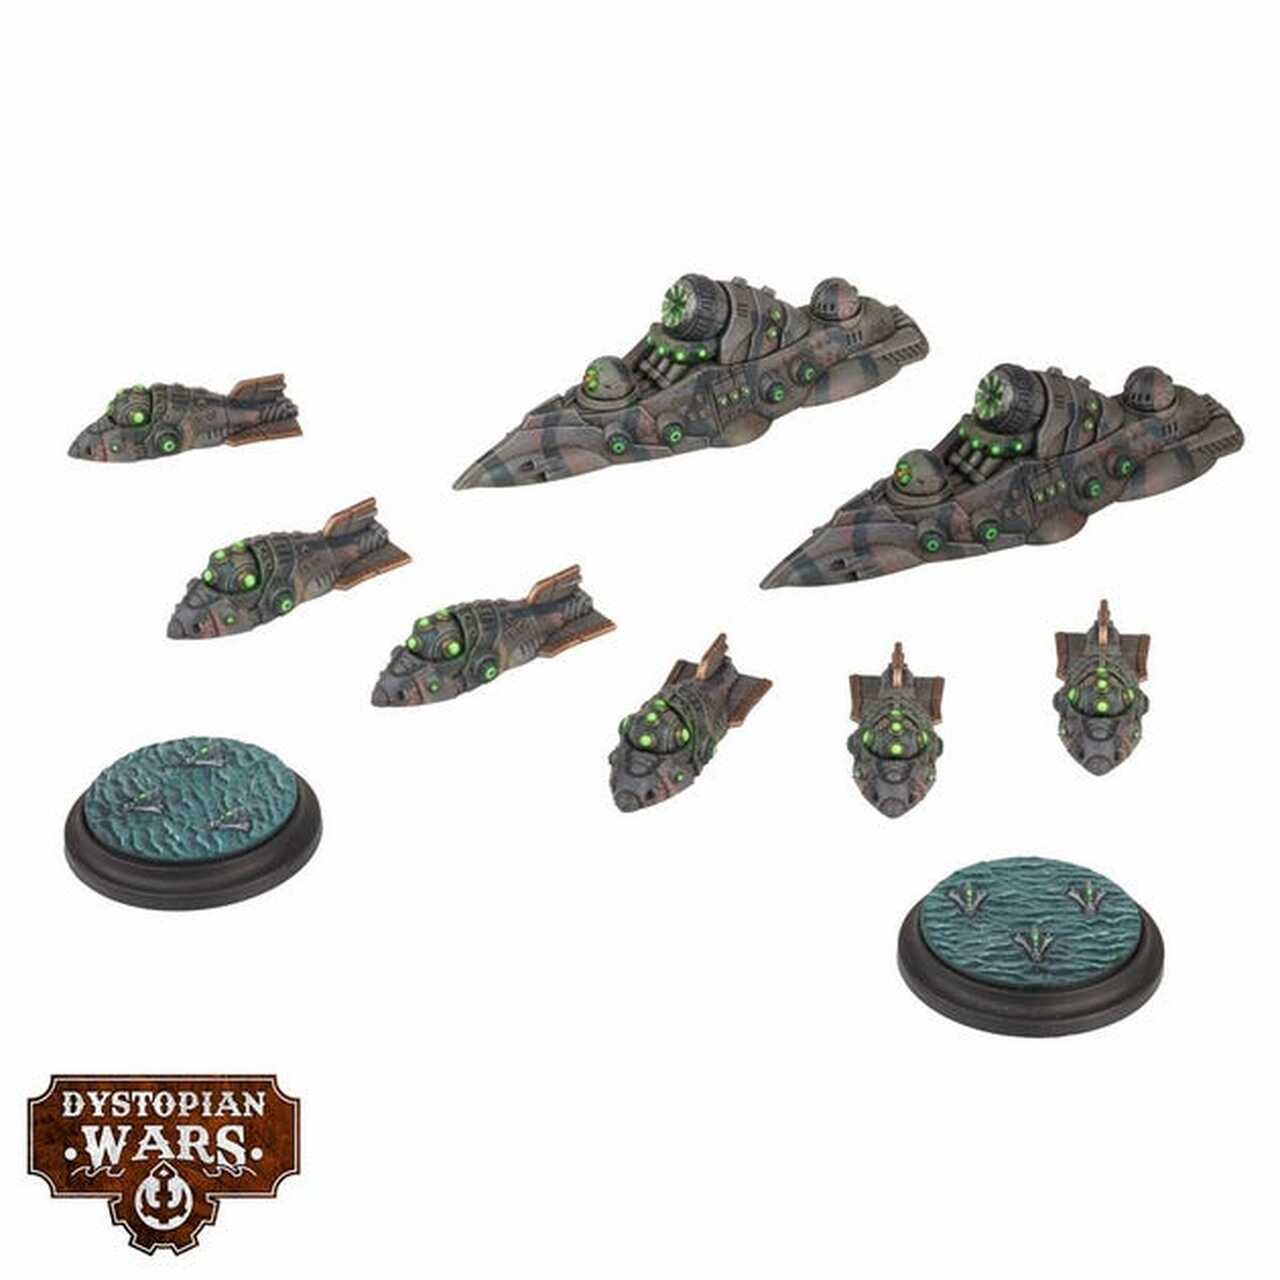 Dystopian Wars The Covenant of the Enlightened Frontline Squadrons